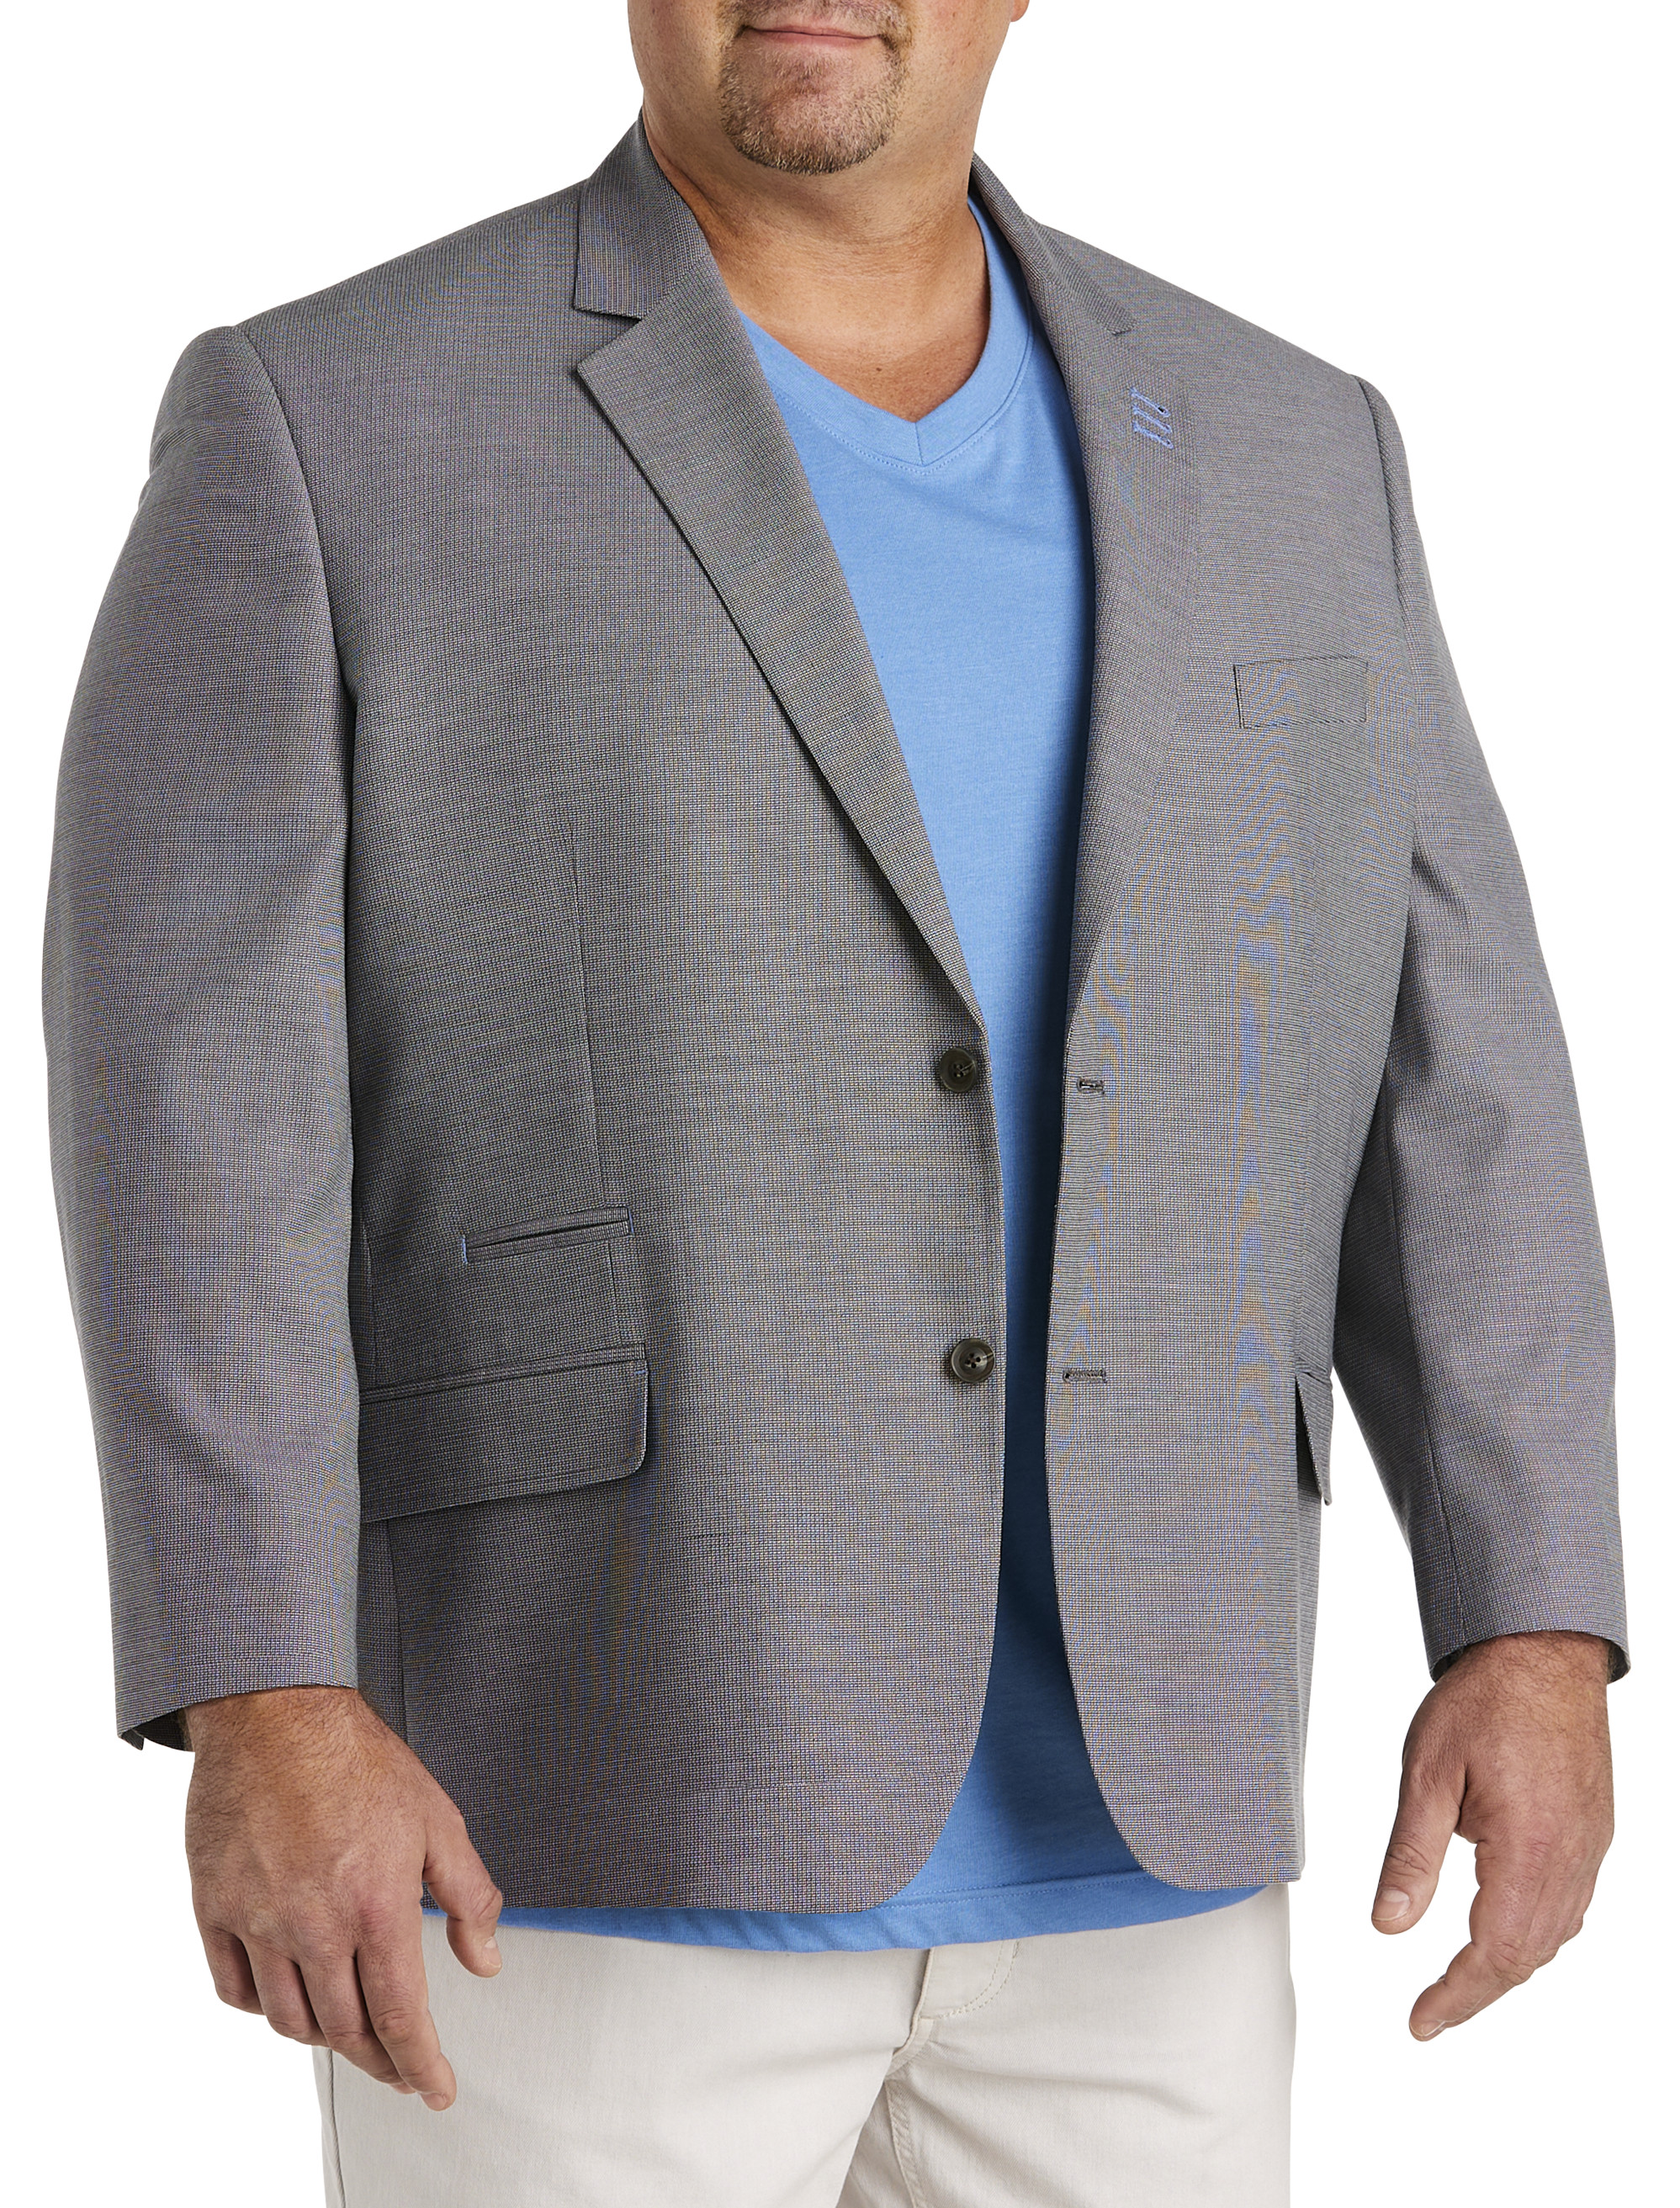 Oak Hill by DXL Men's Big and Tall Jacket-Relaxer Suit Jacket